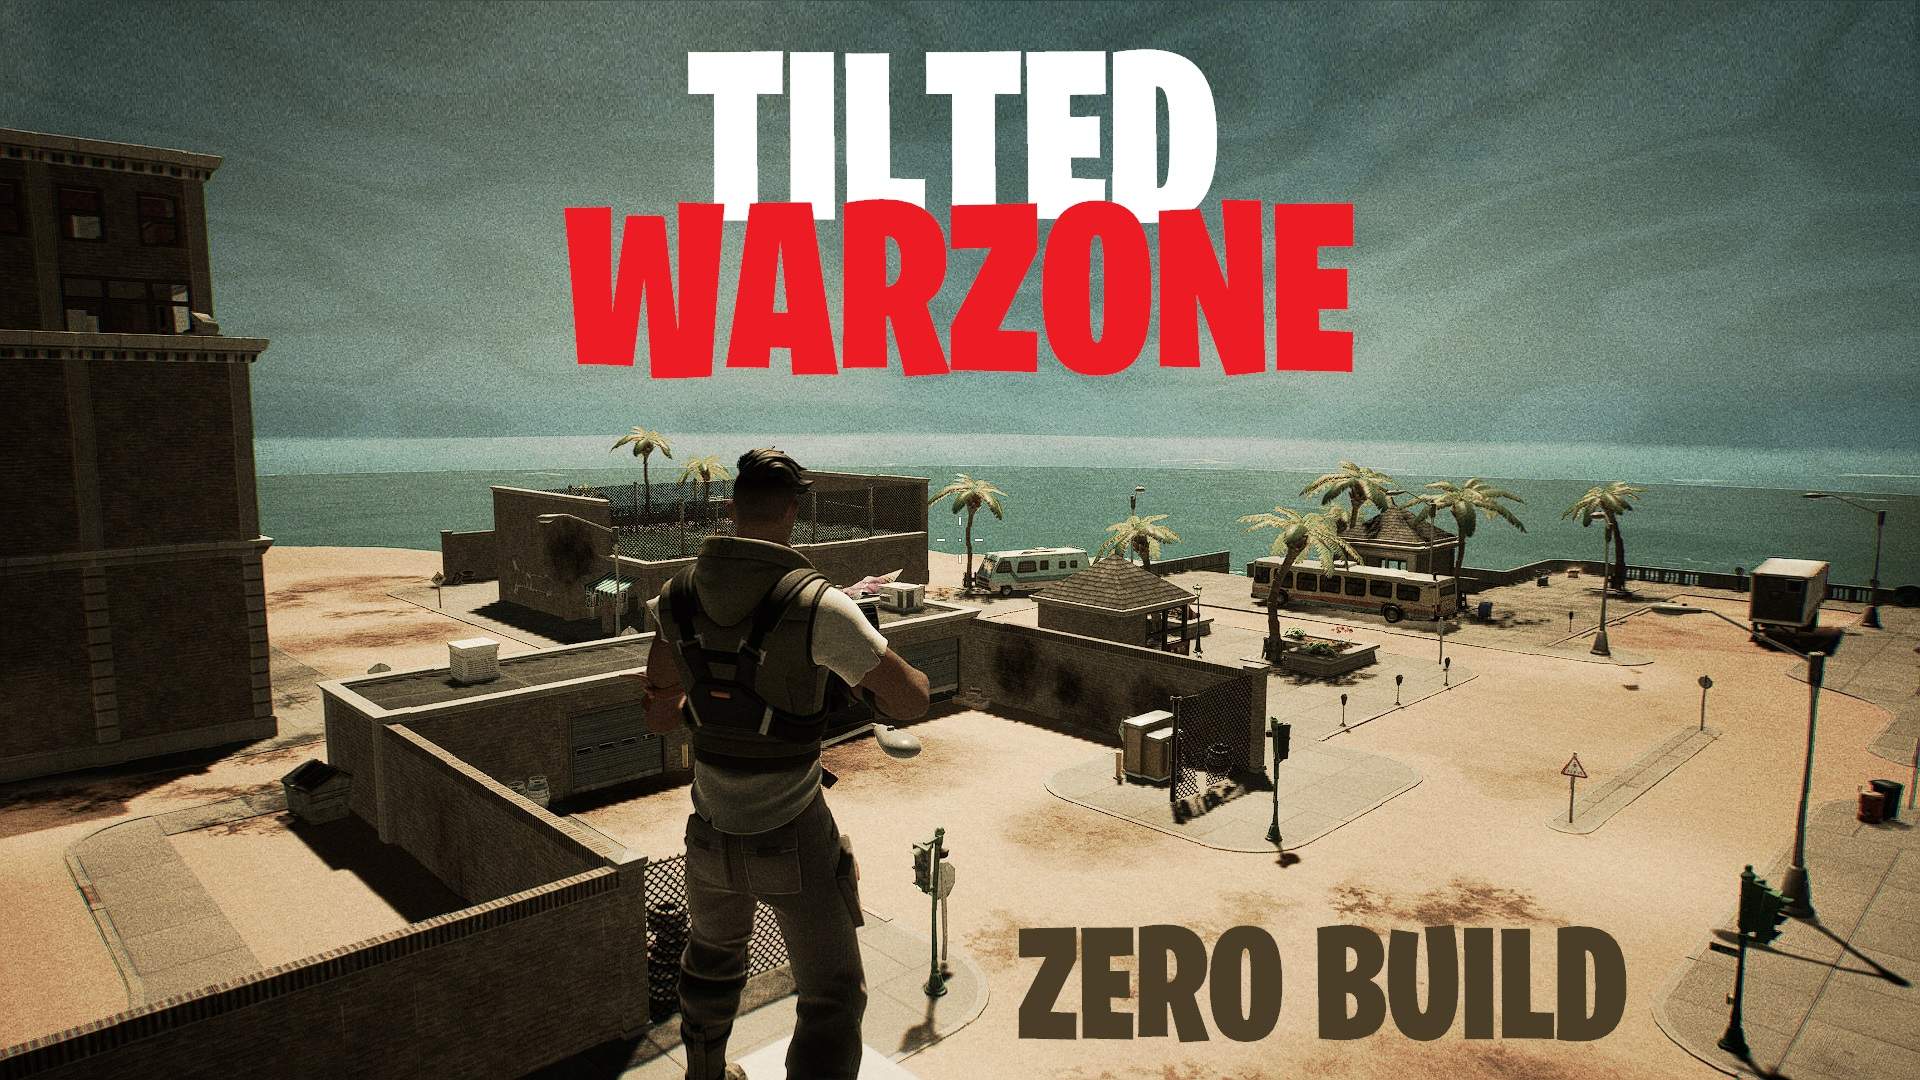 Tilted Warzone